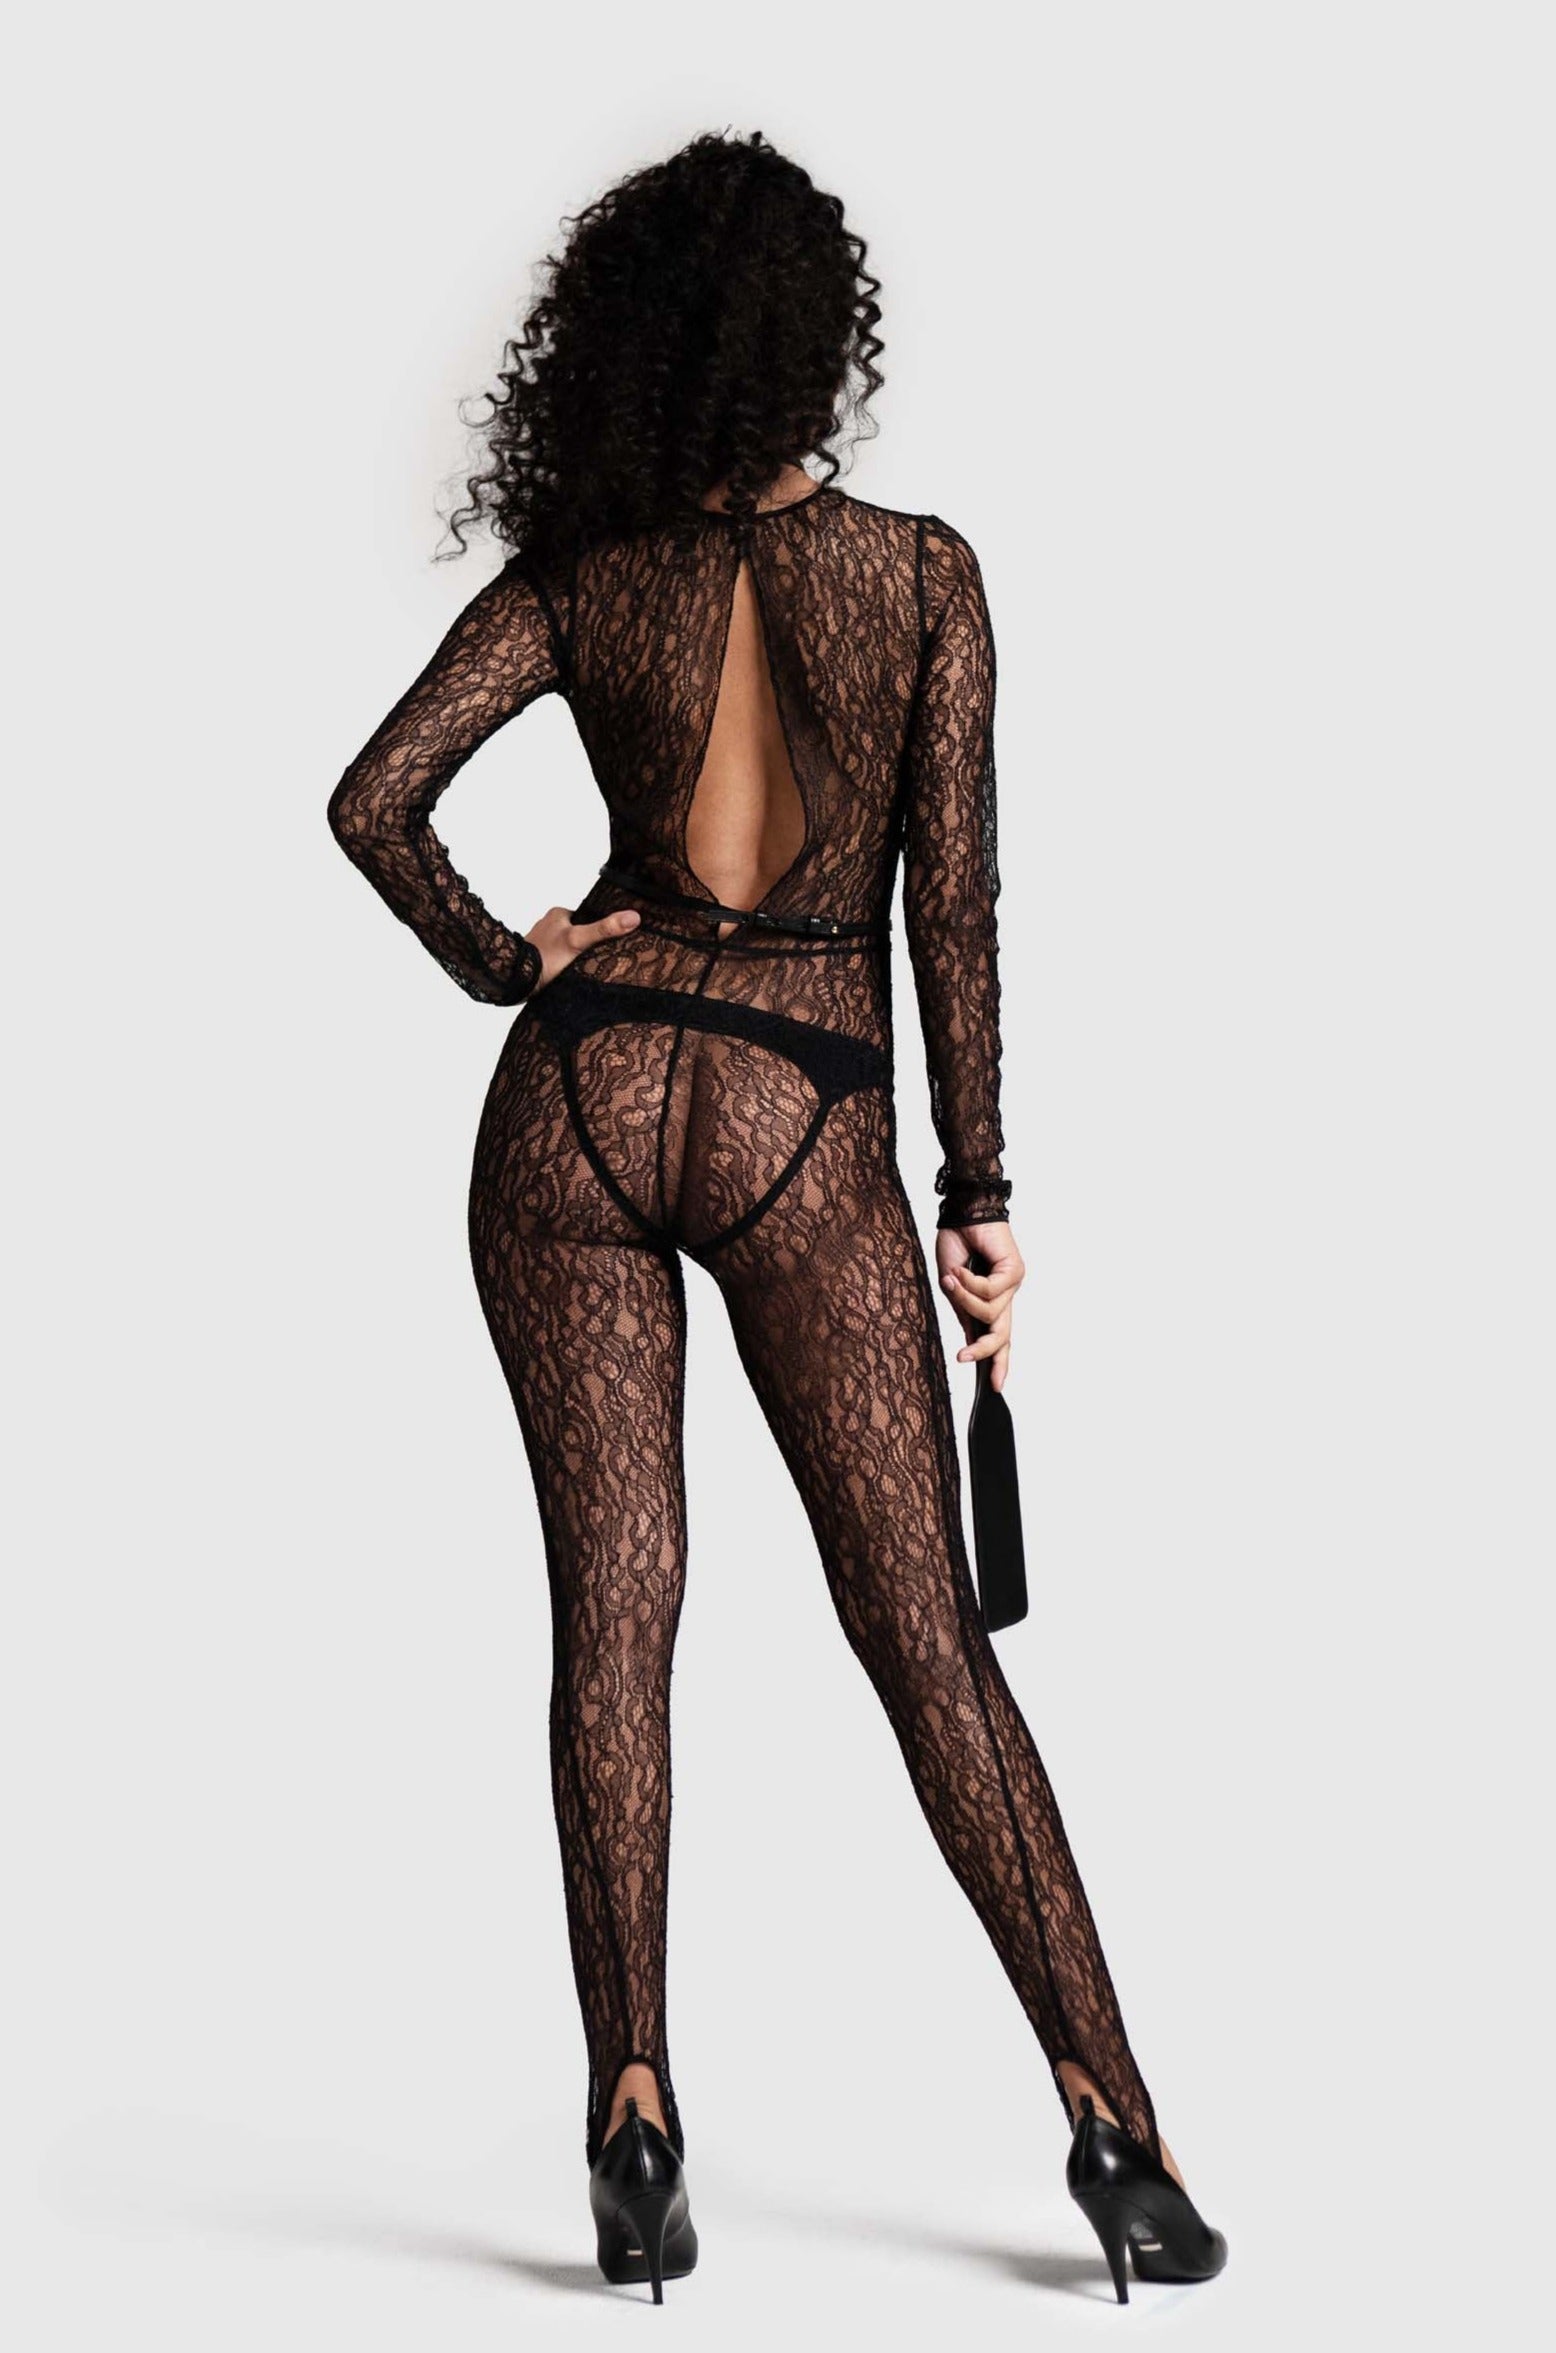 stretch French lace catsuit in black, back slit